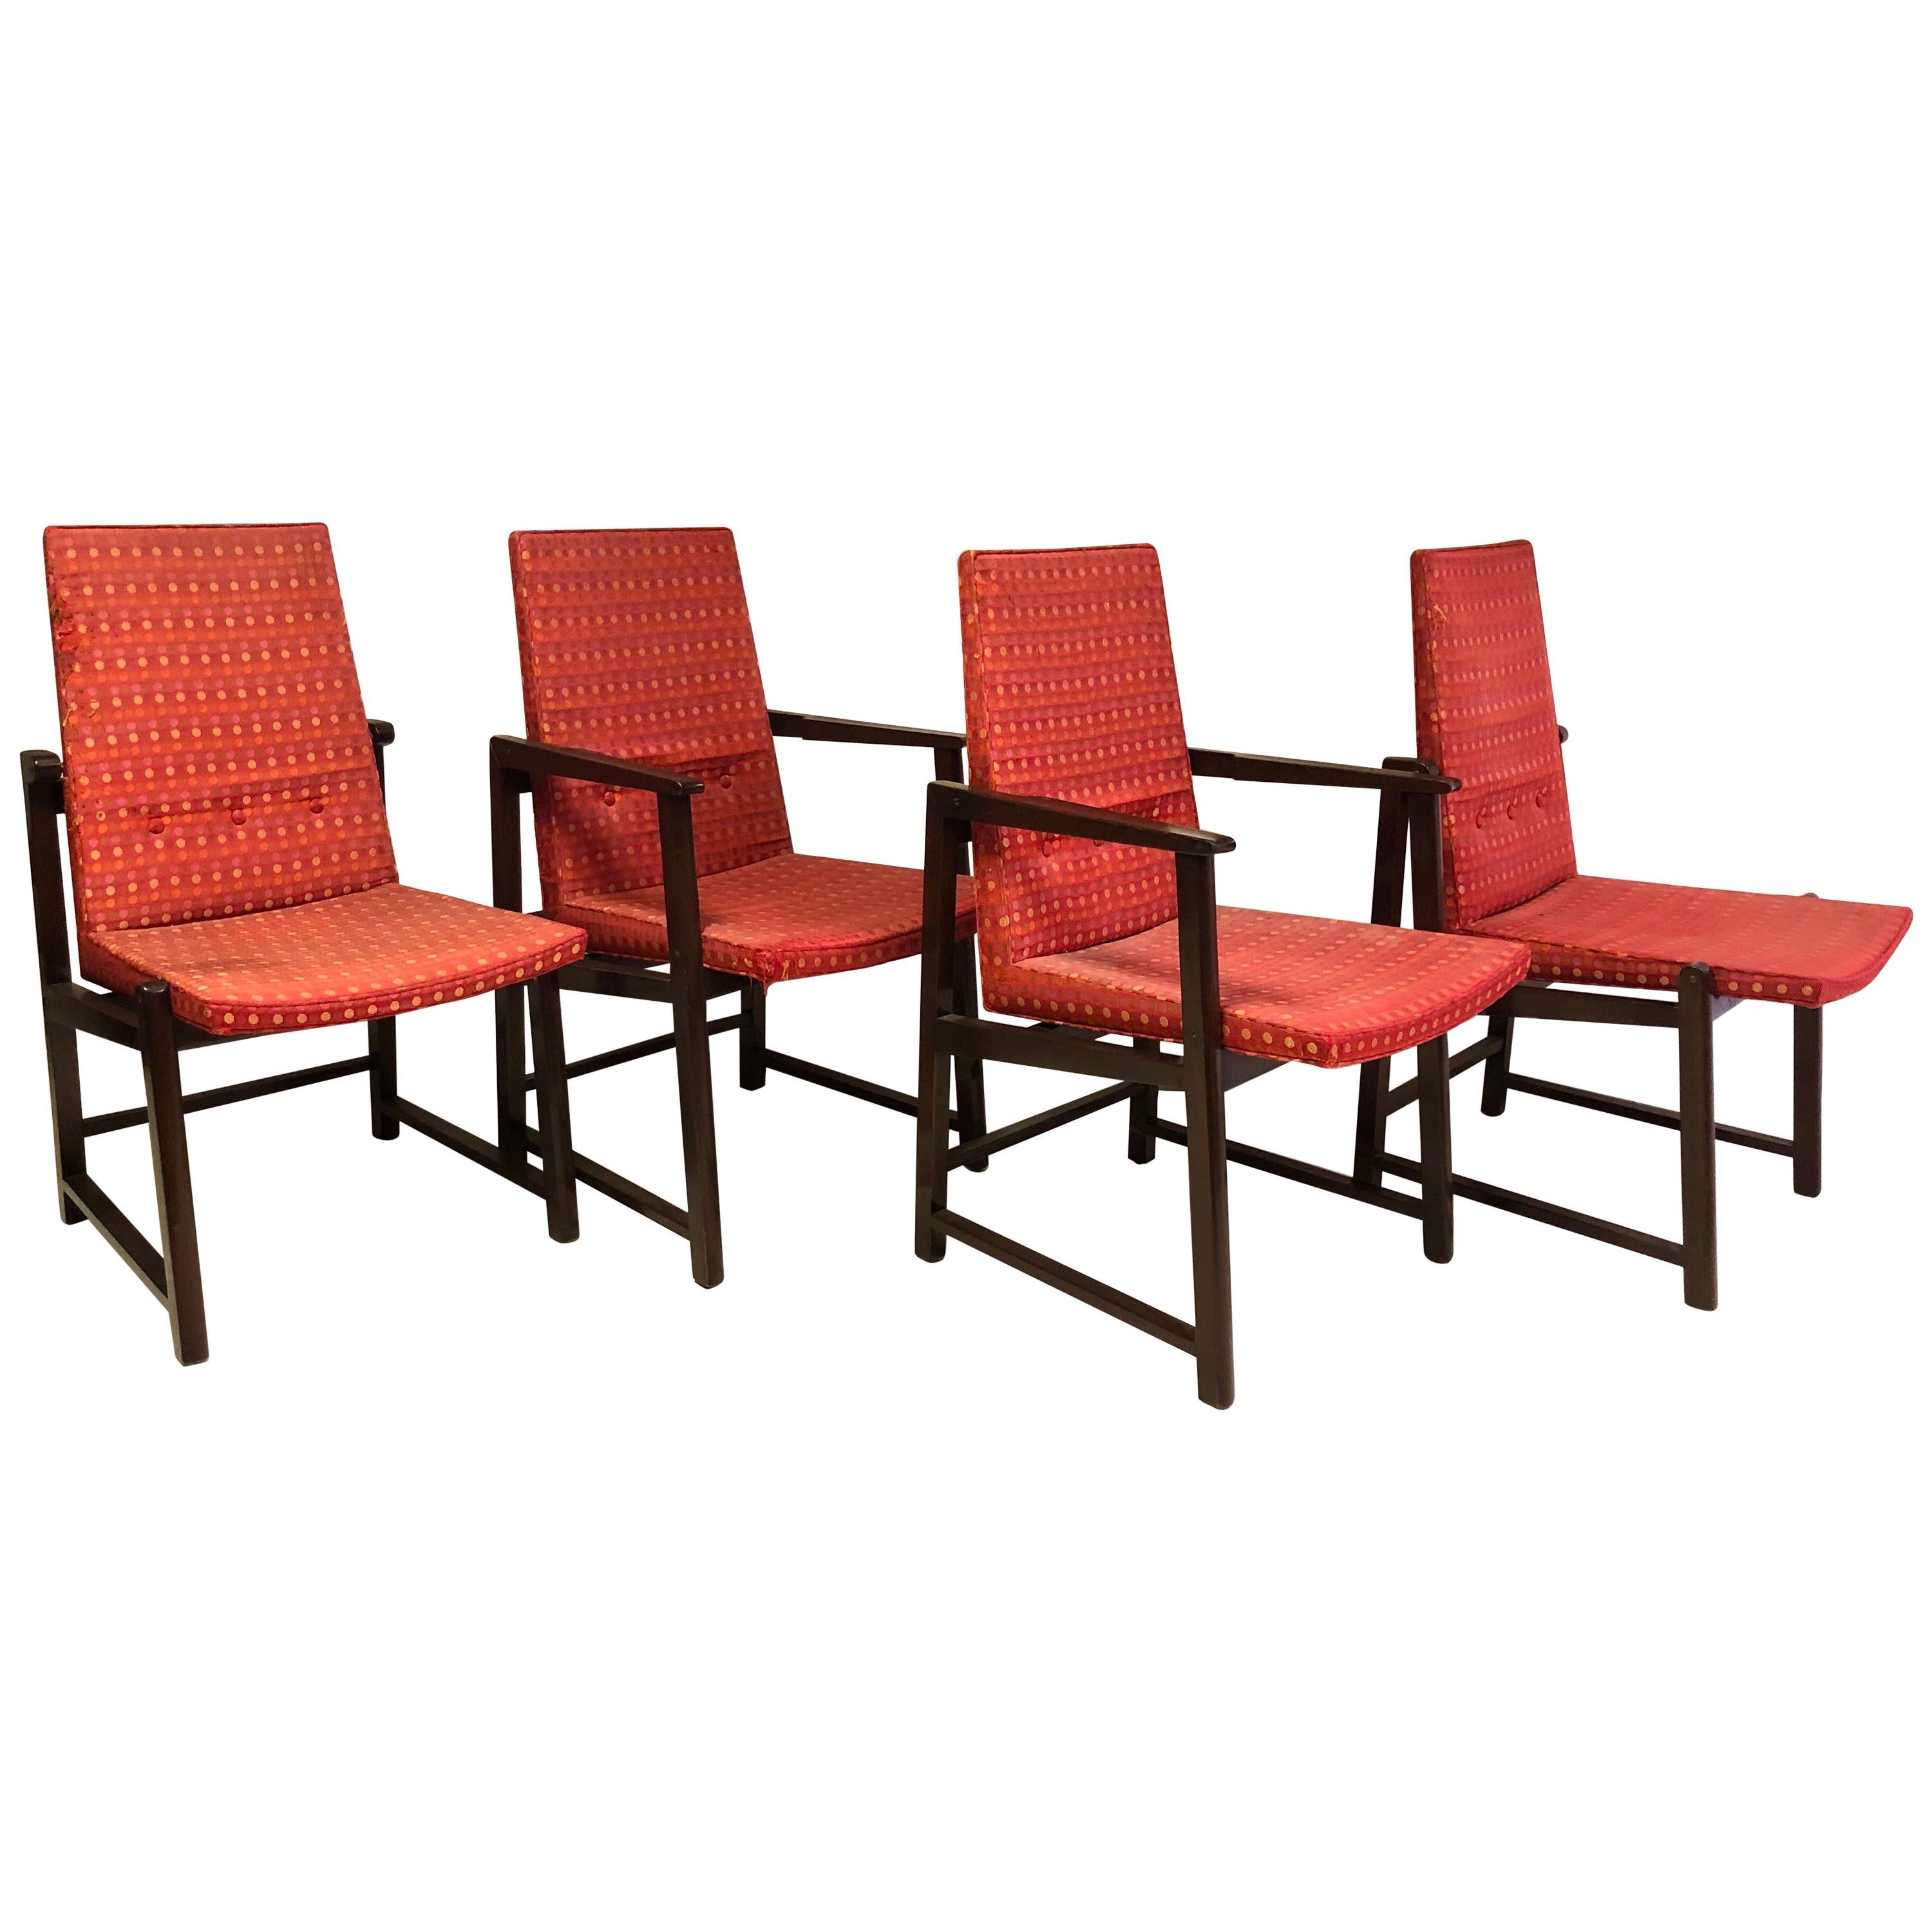 Edward Wormley for Dunbar dining chairs, models 6038 & 6037 in dark mahogany frames with original Jack Lenor Larsen fabric. Two arm and two side chairs, supported by brass spacers, with Dunbar label.